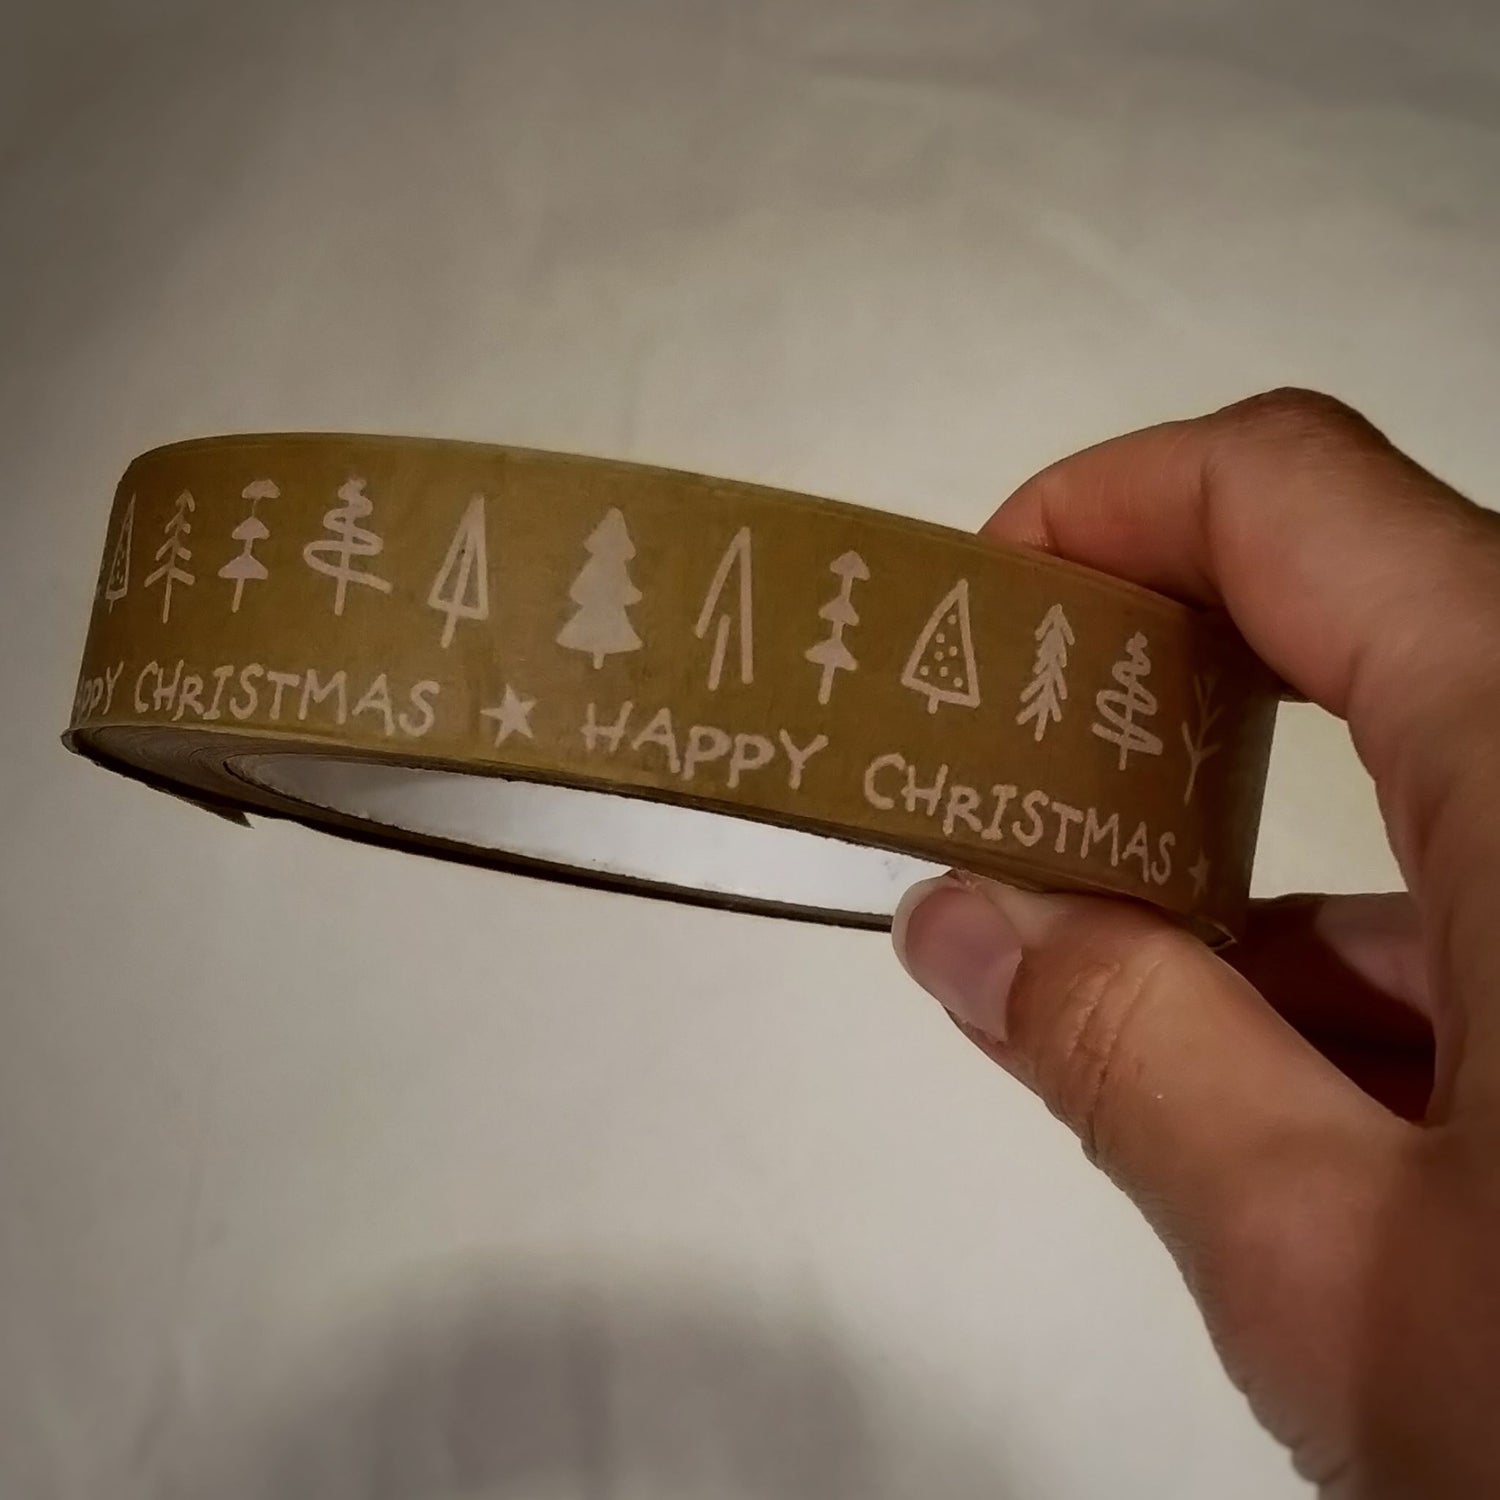 Happy Christmas Eco Friendly Paper Tape - in hand